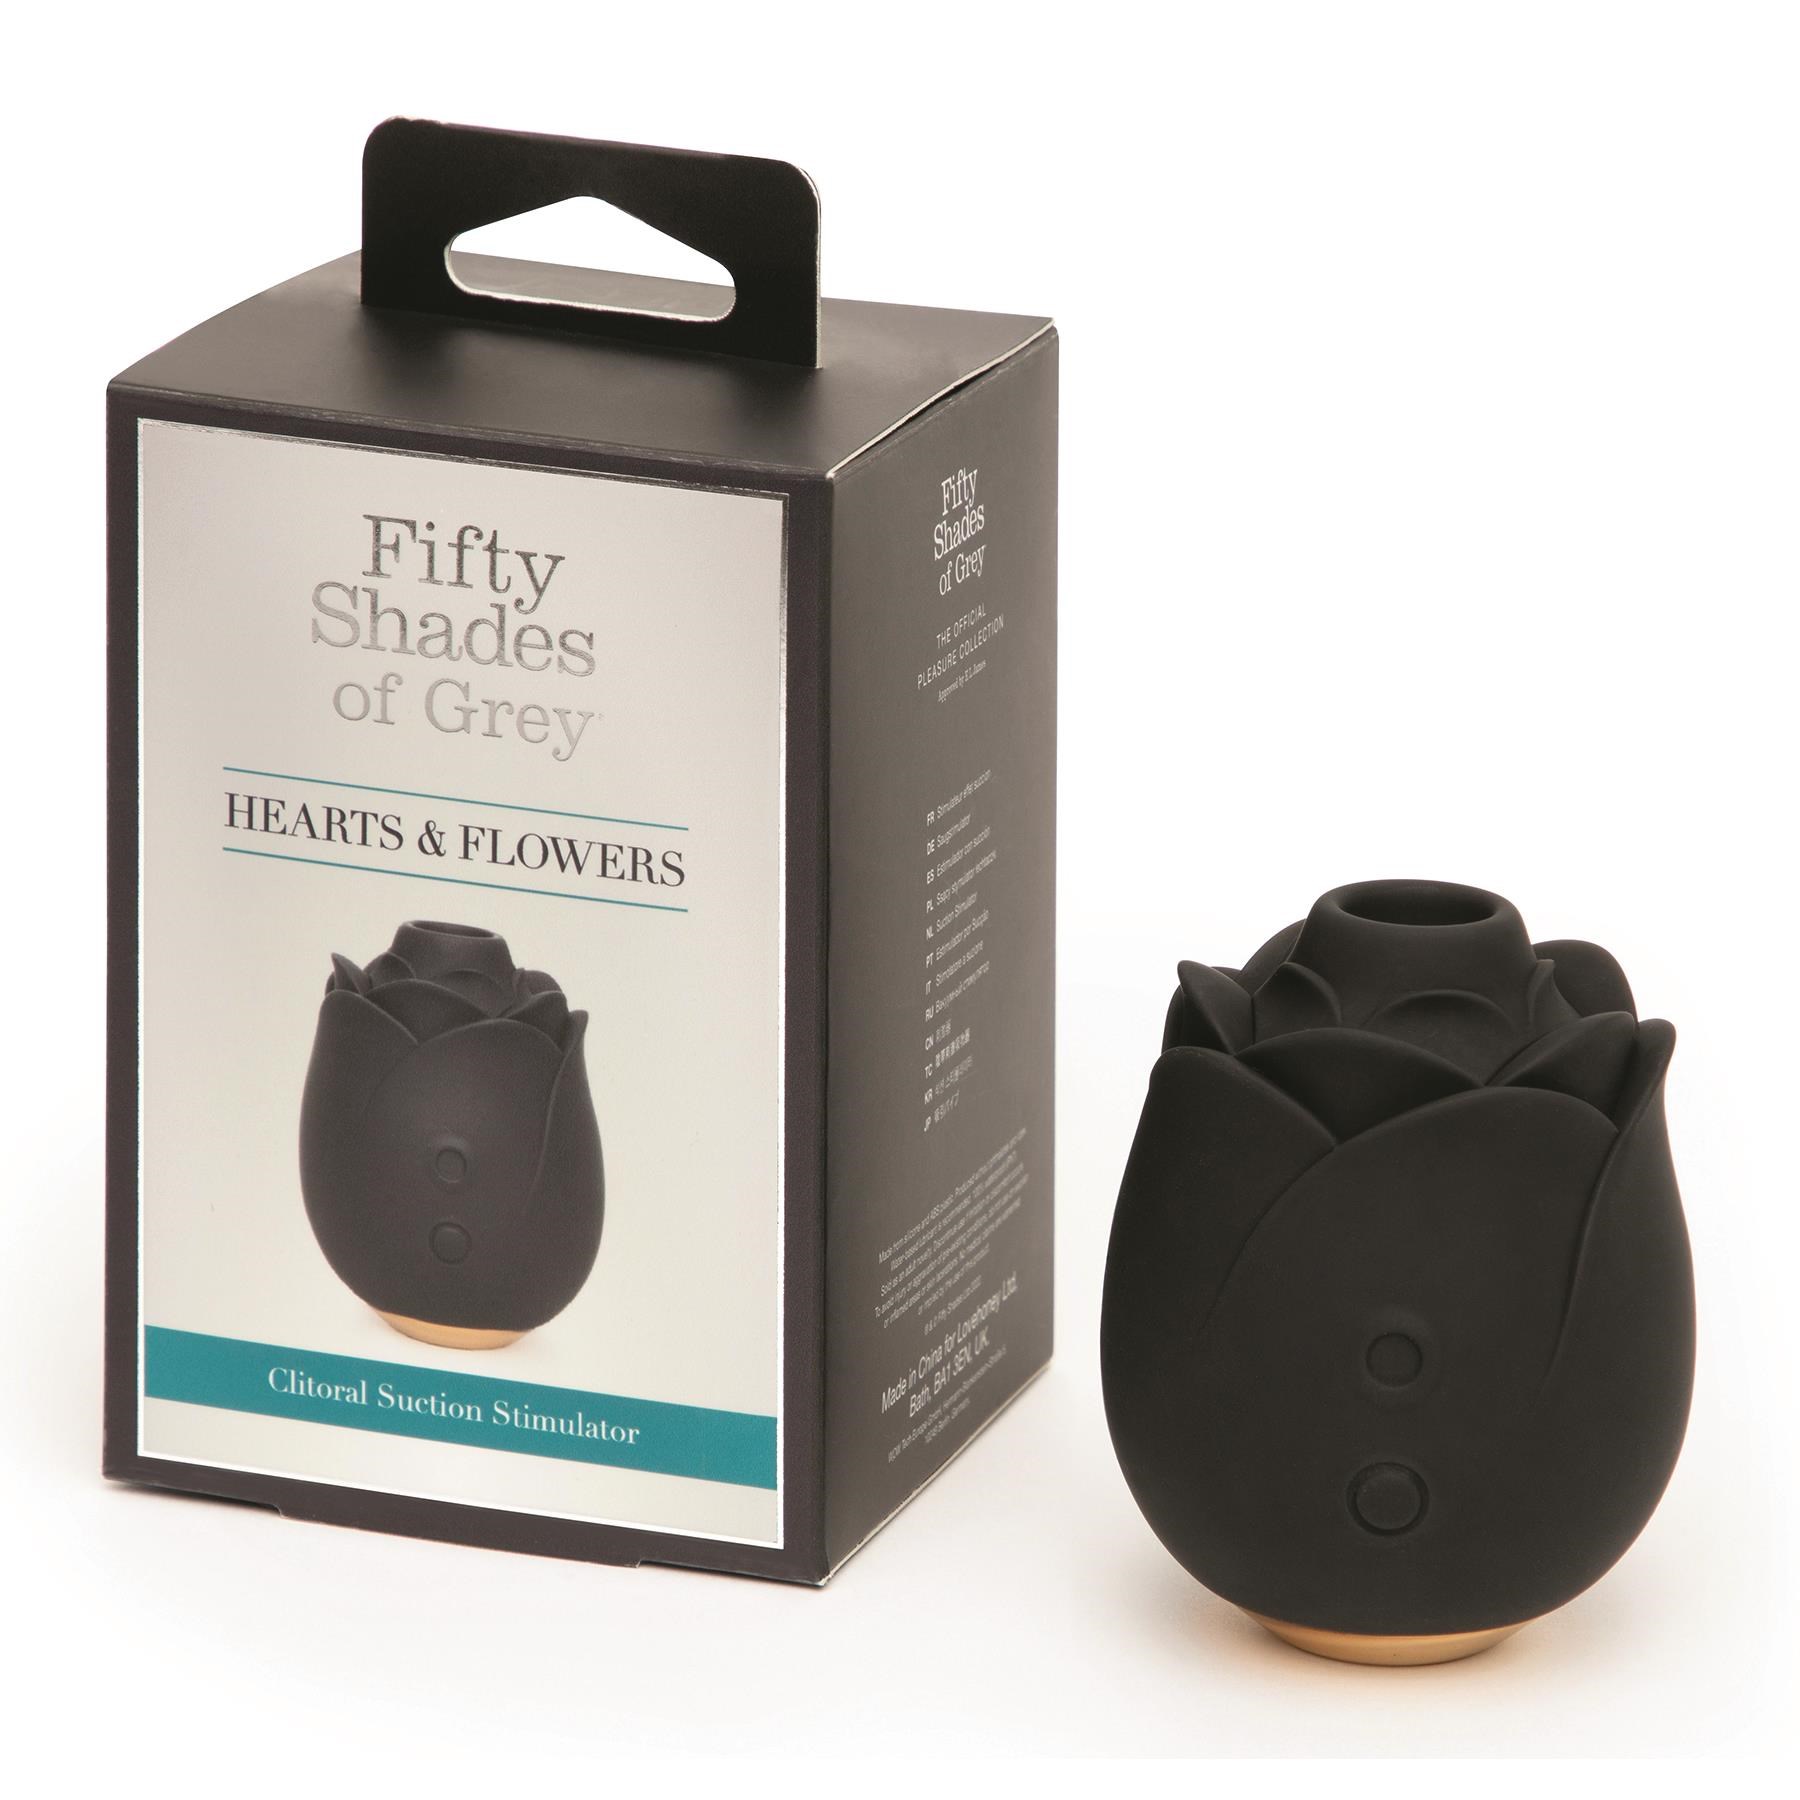 Fifty Shades of Grey Hearts And Flowers Clitoral Stimulator - Product and Packaging